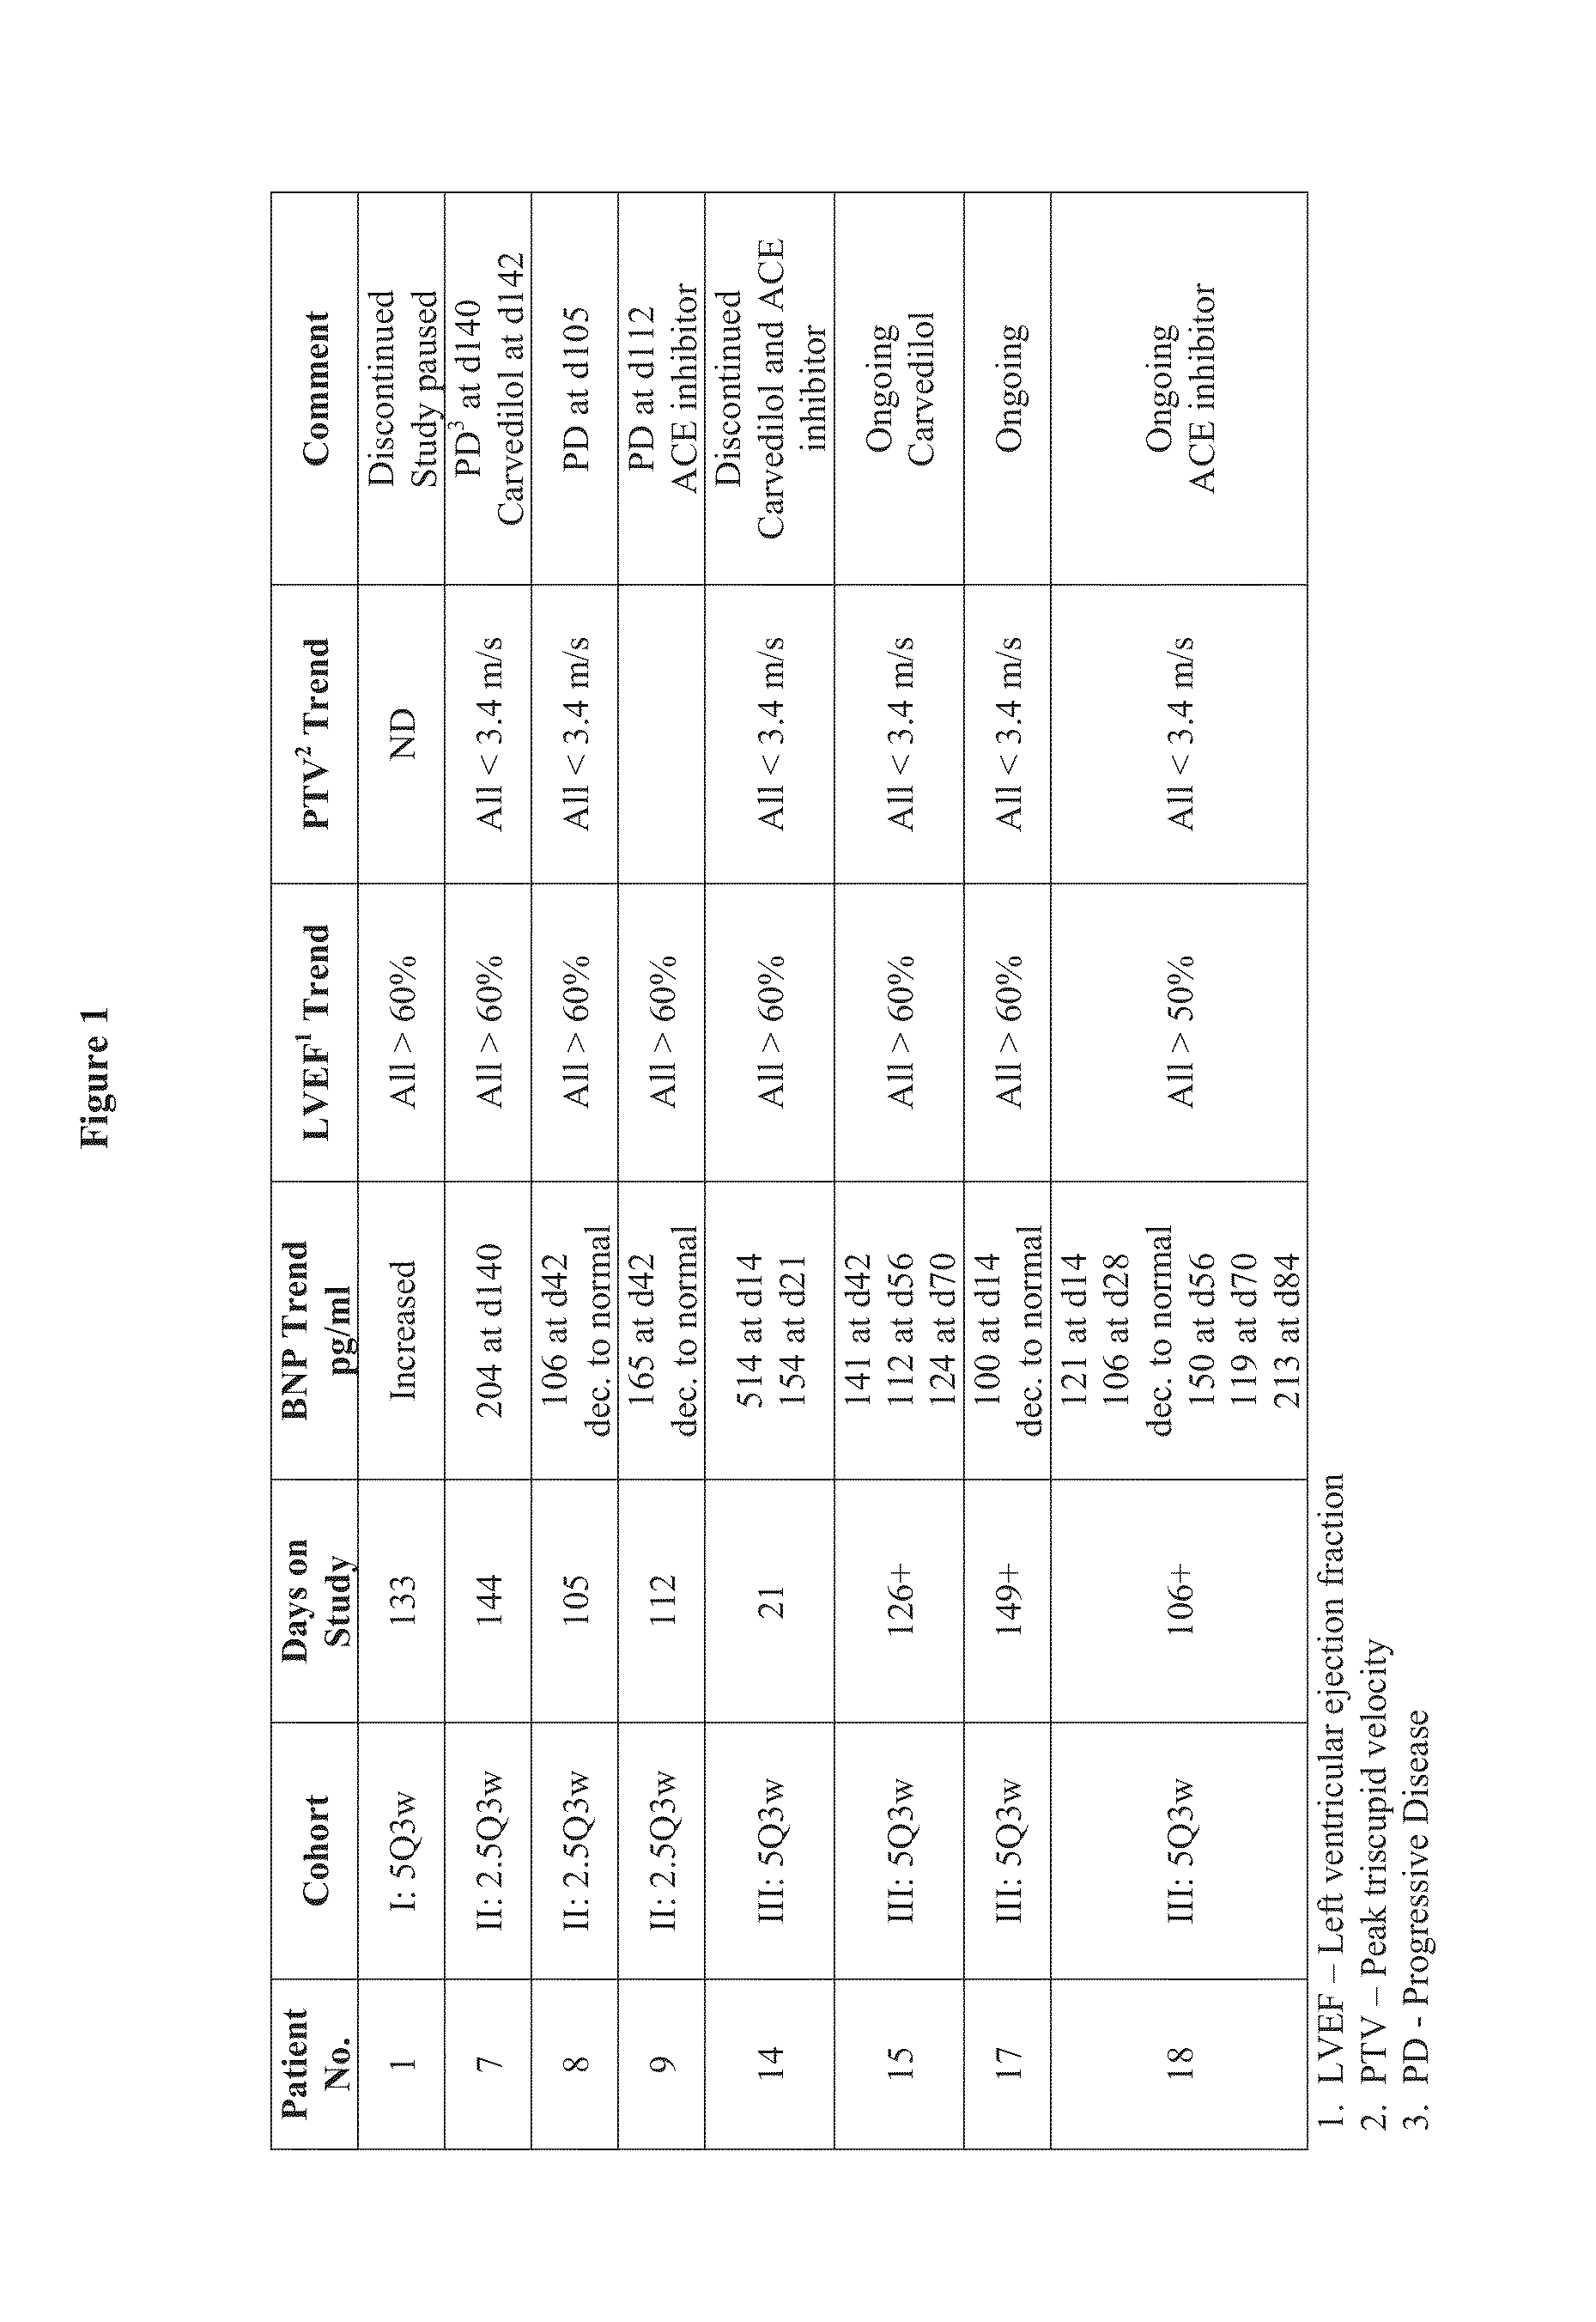 Methods and Monitoring of Treatment with a DLL4 Antagonist